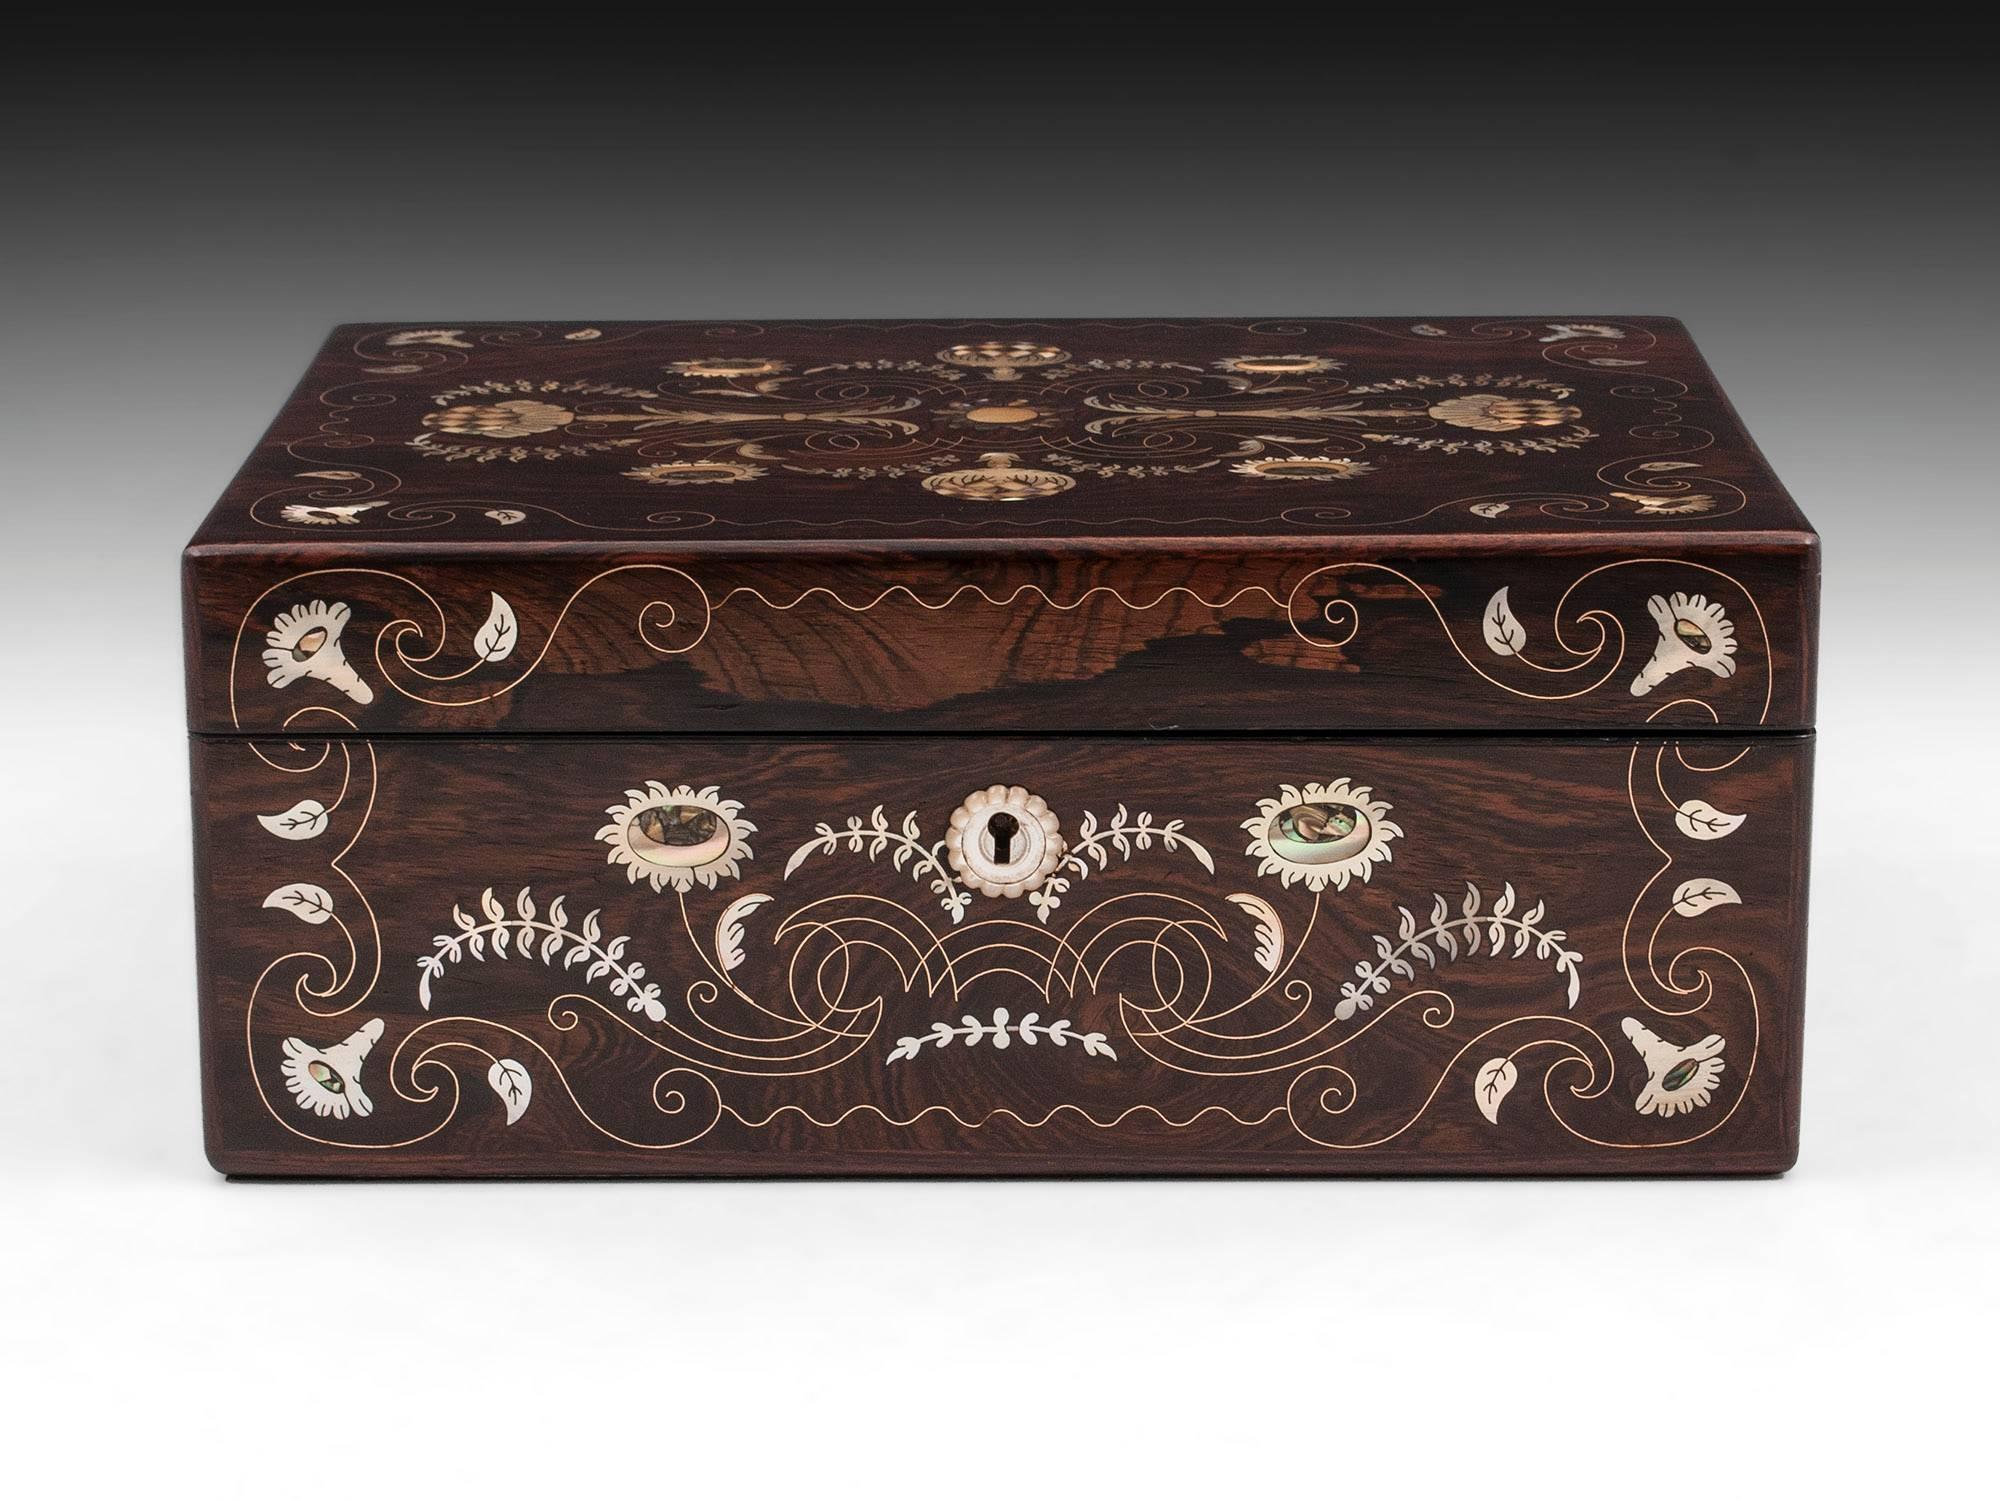 Pretty antique rosewood jewelry box with beautiful, delicate floral inlays using brass, abalone and mother of pearl, with a carved mother of pearl escutcheon.

The interior of this exquisite antique jewelry box is lined with black silk paper and